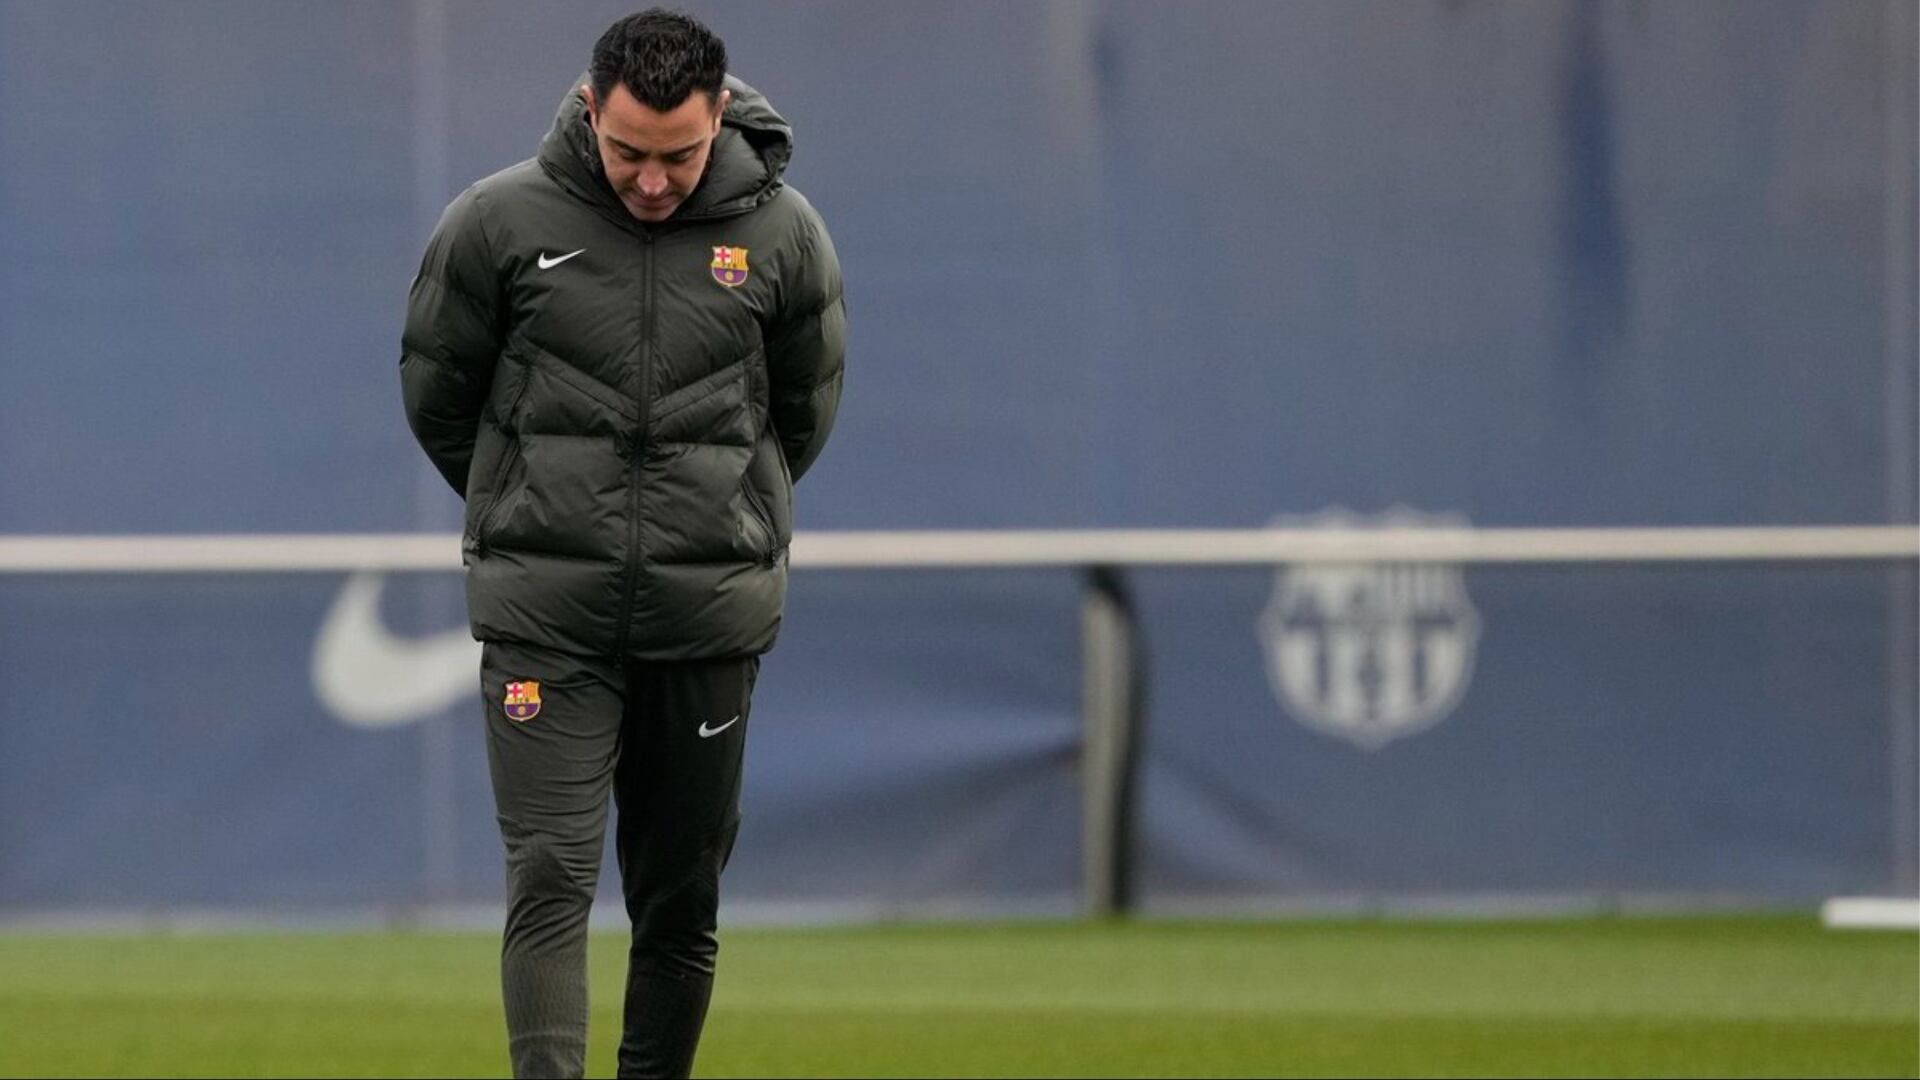 FC Barcelona player on loan has bold words for Xavi and doesn't want to return